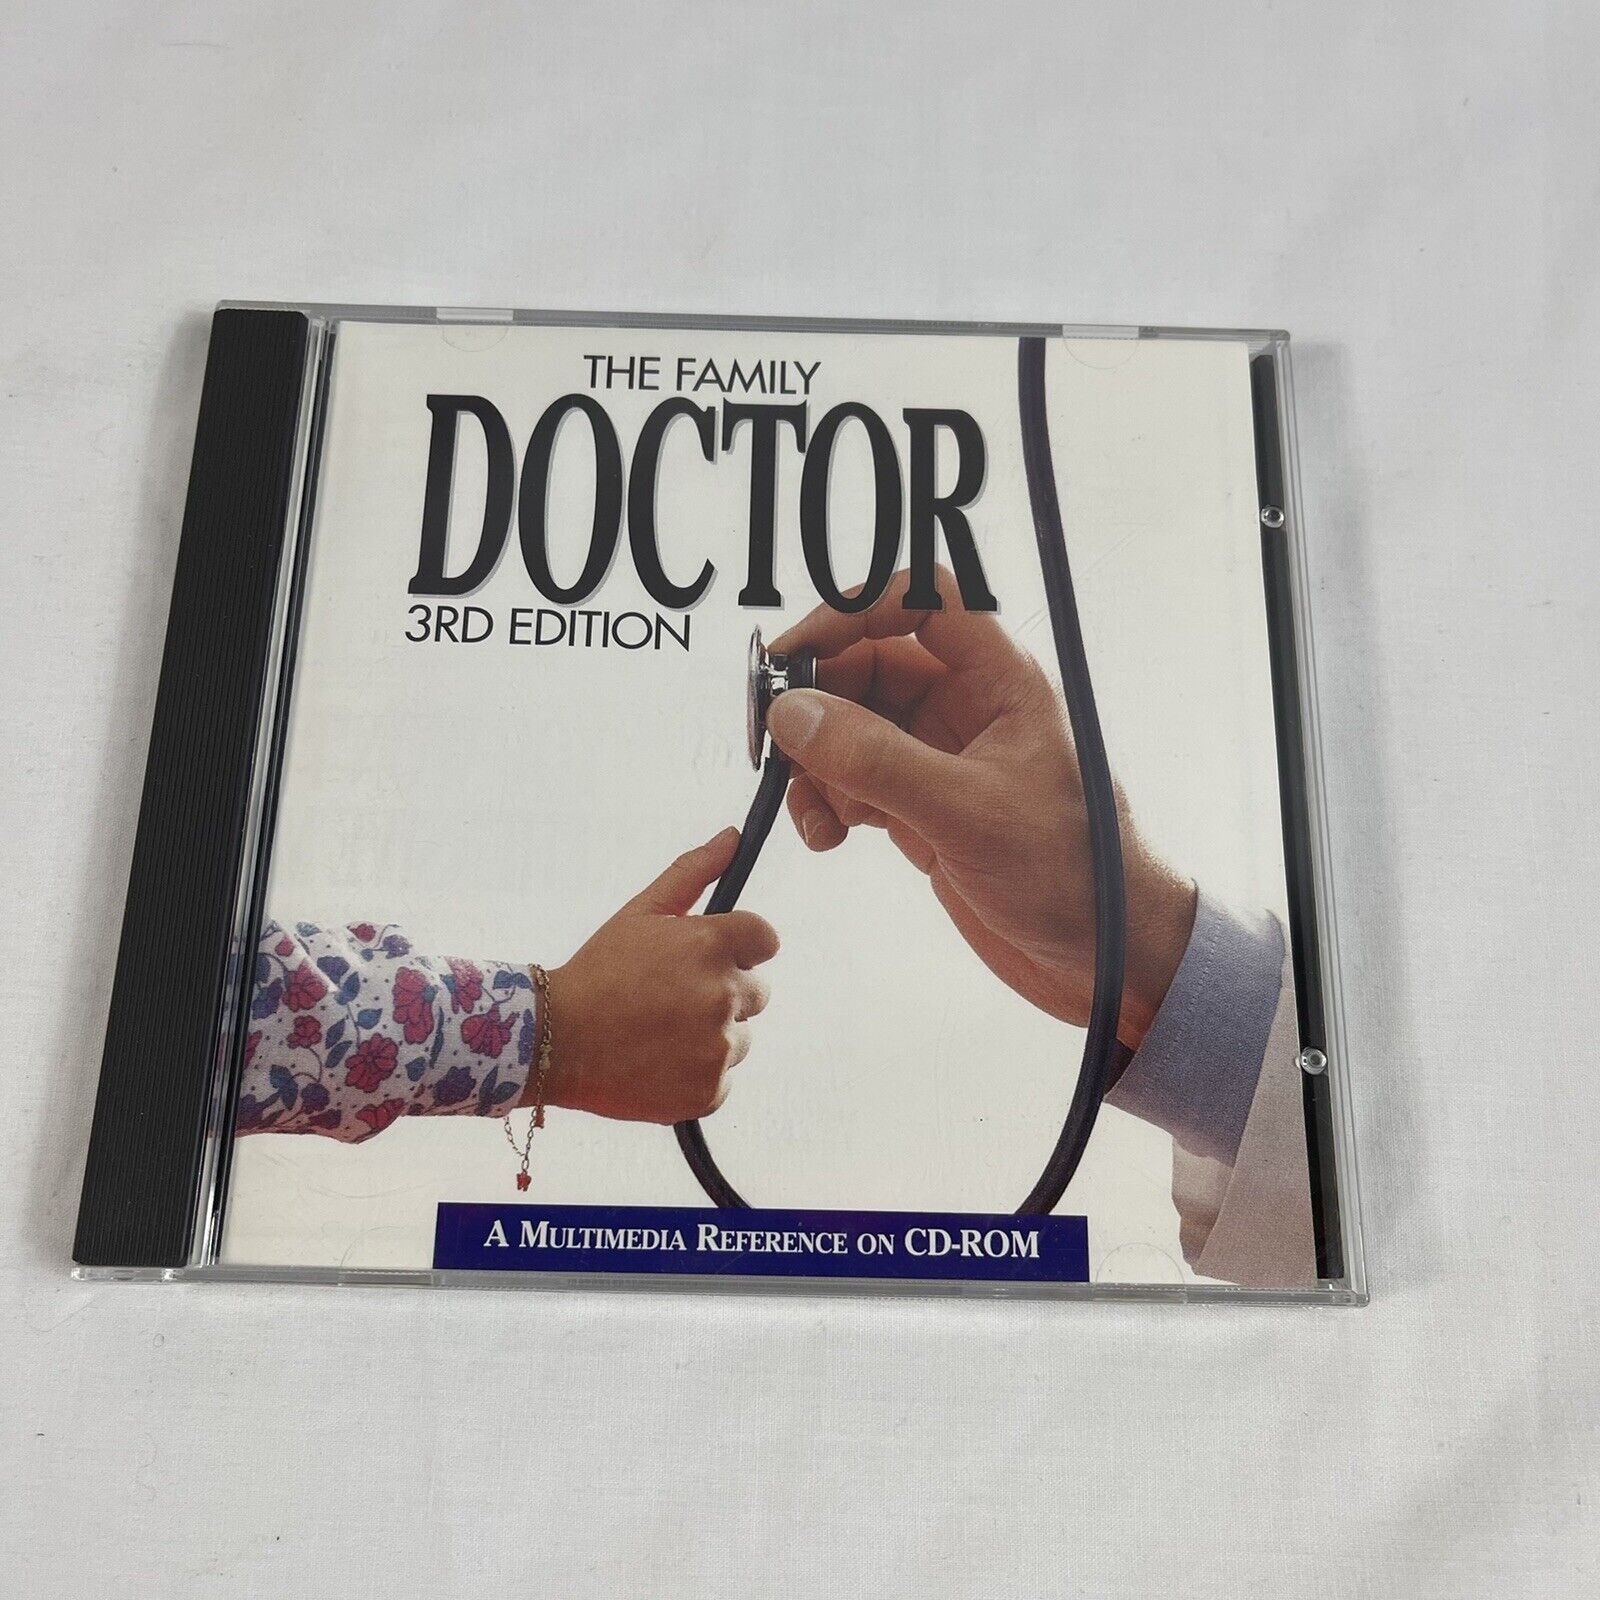 The Family Doctor 3rd Edition for Mac